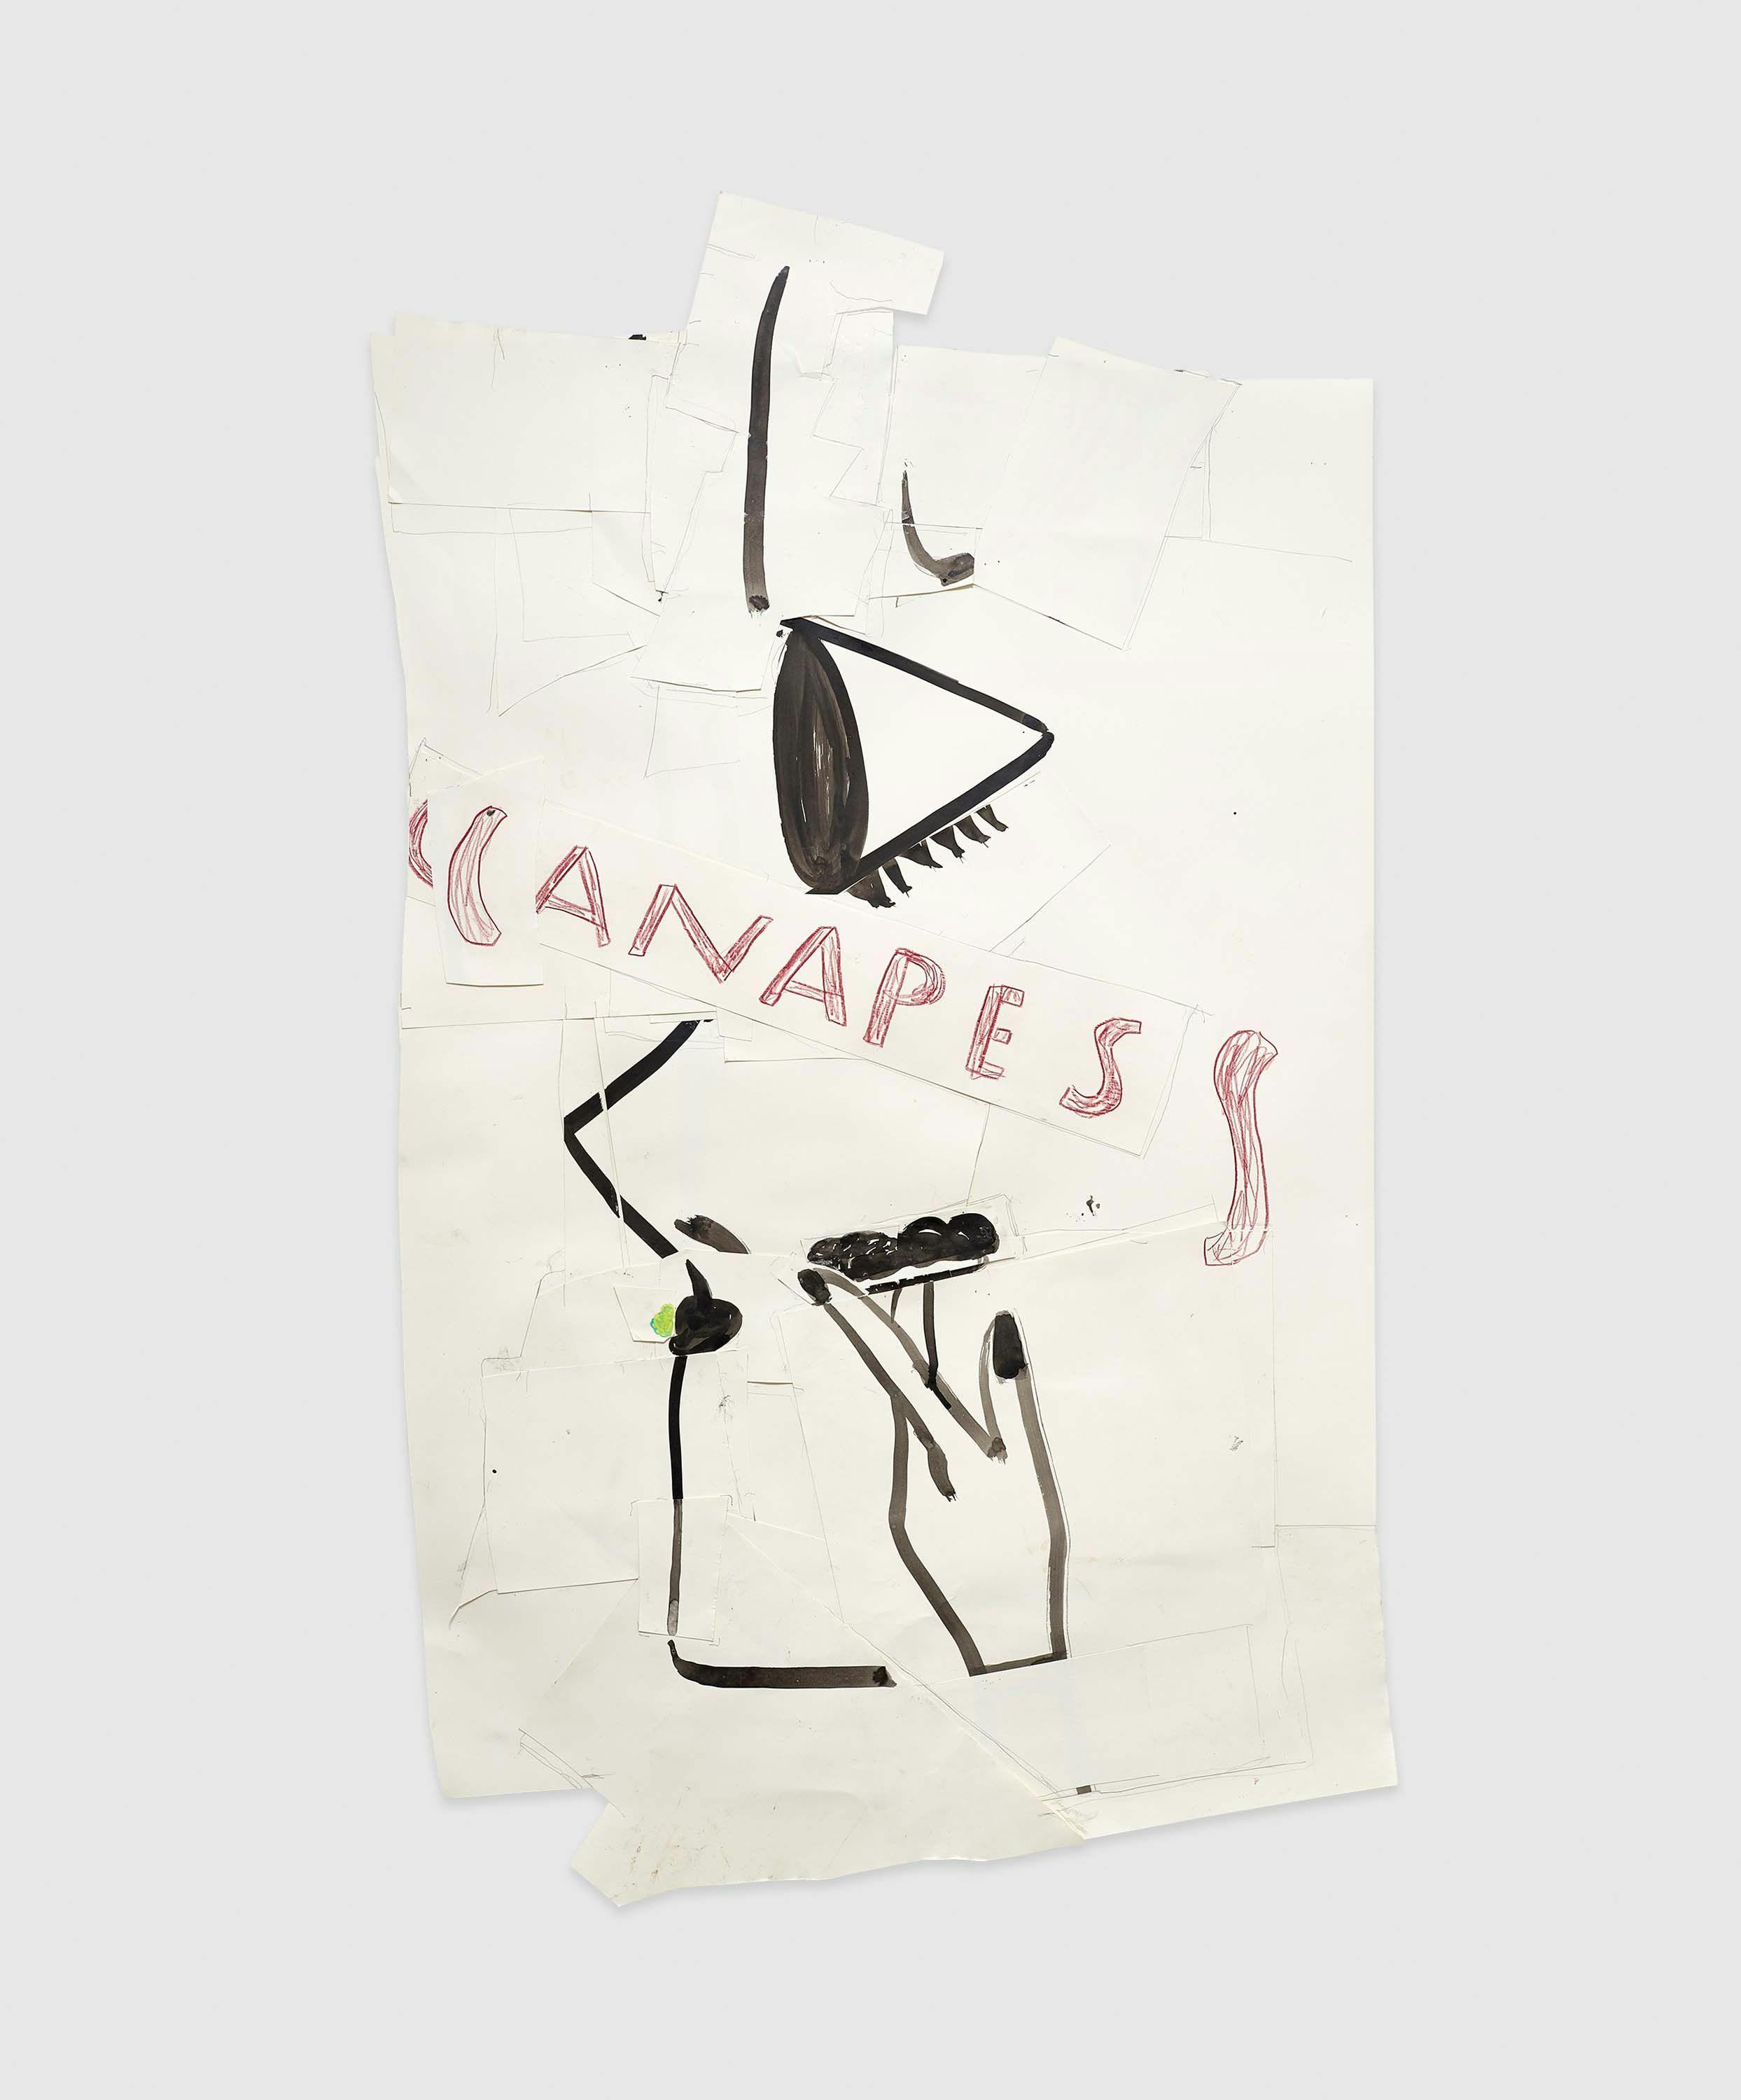 A work on paper by Rose Wylie, titled Canapes, dated 2014.